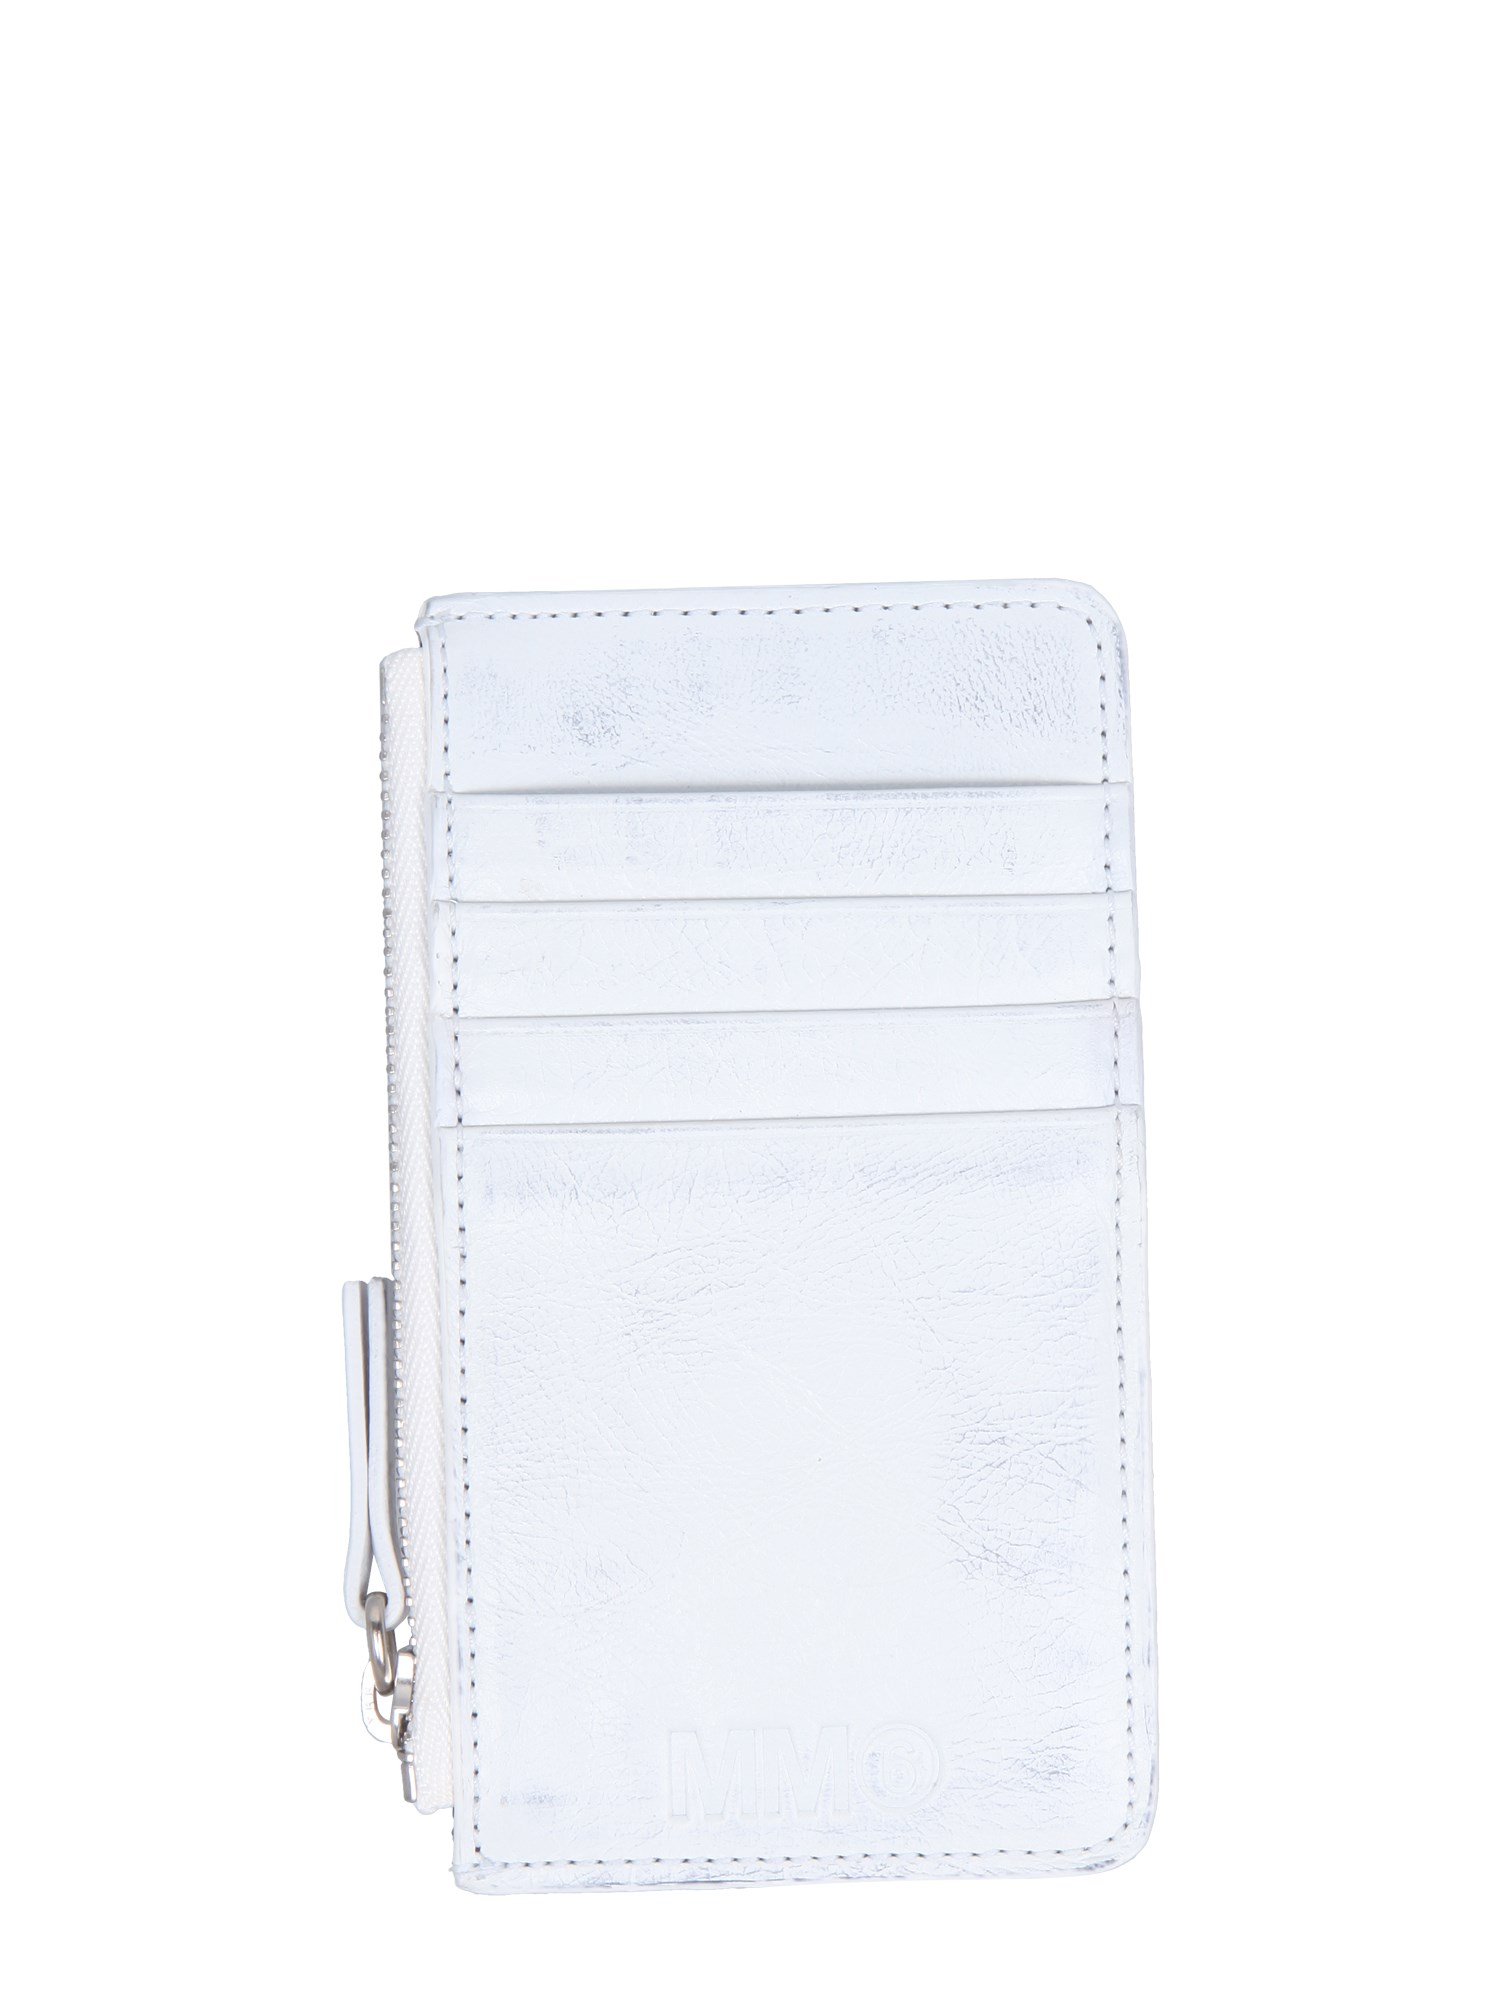 mm6 maison margiela small card holder with zip